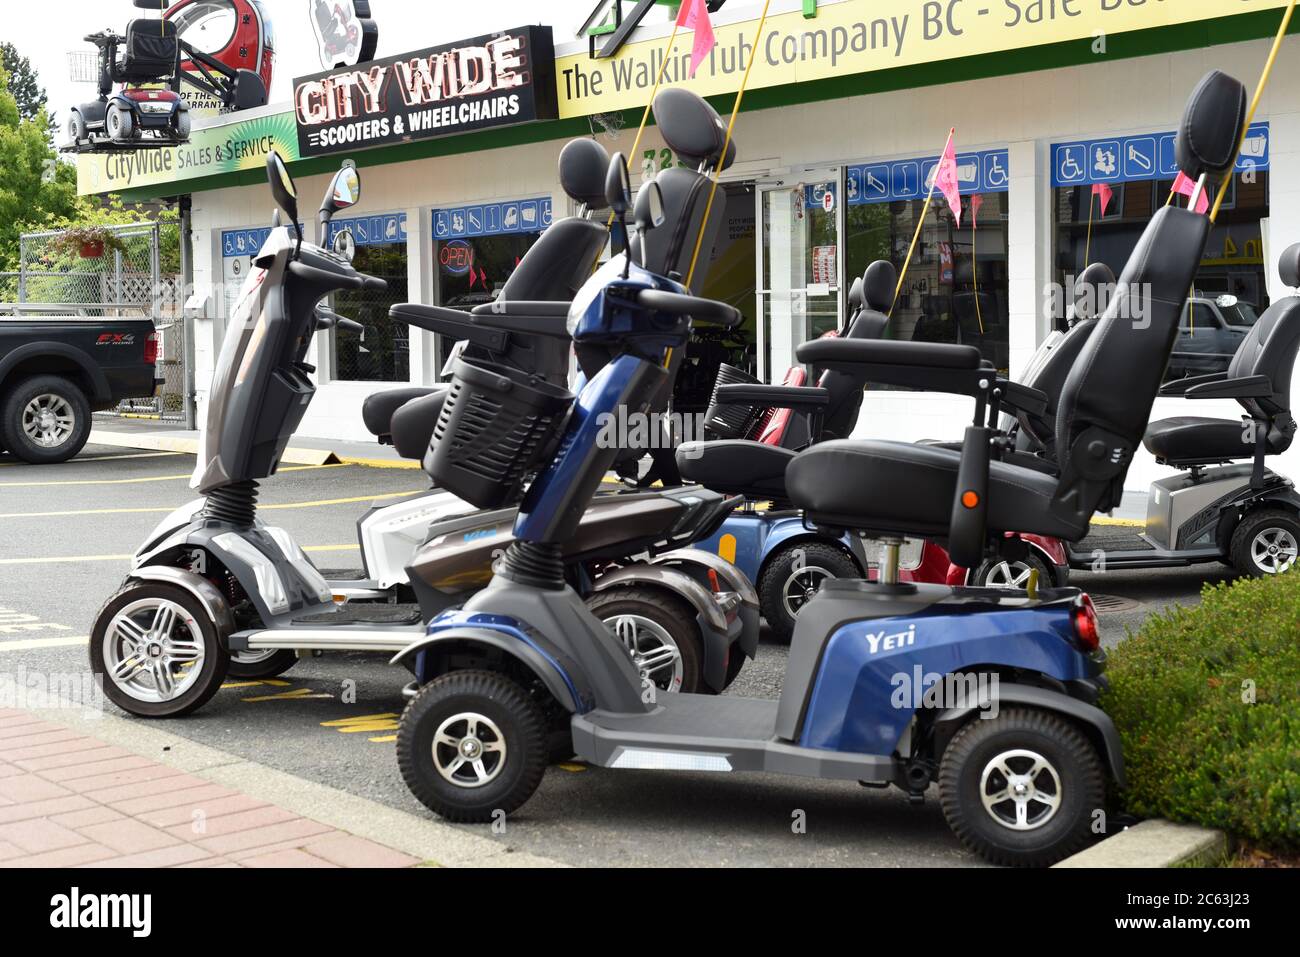 Personal mobility scooters sit outside the City Wide Scooters & Wheelchair store in Langford, British Columbia, Canada. Stock Photo